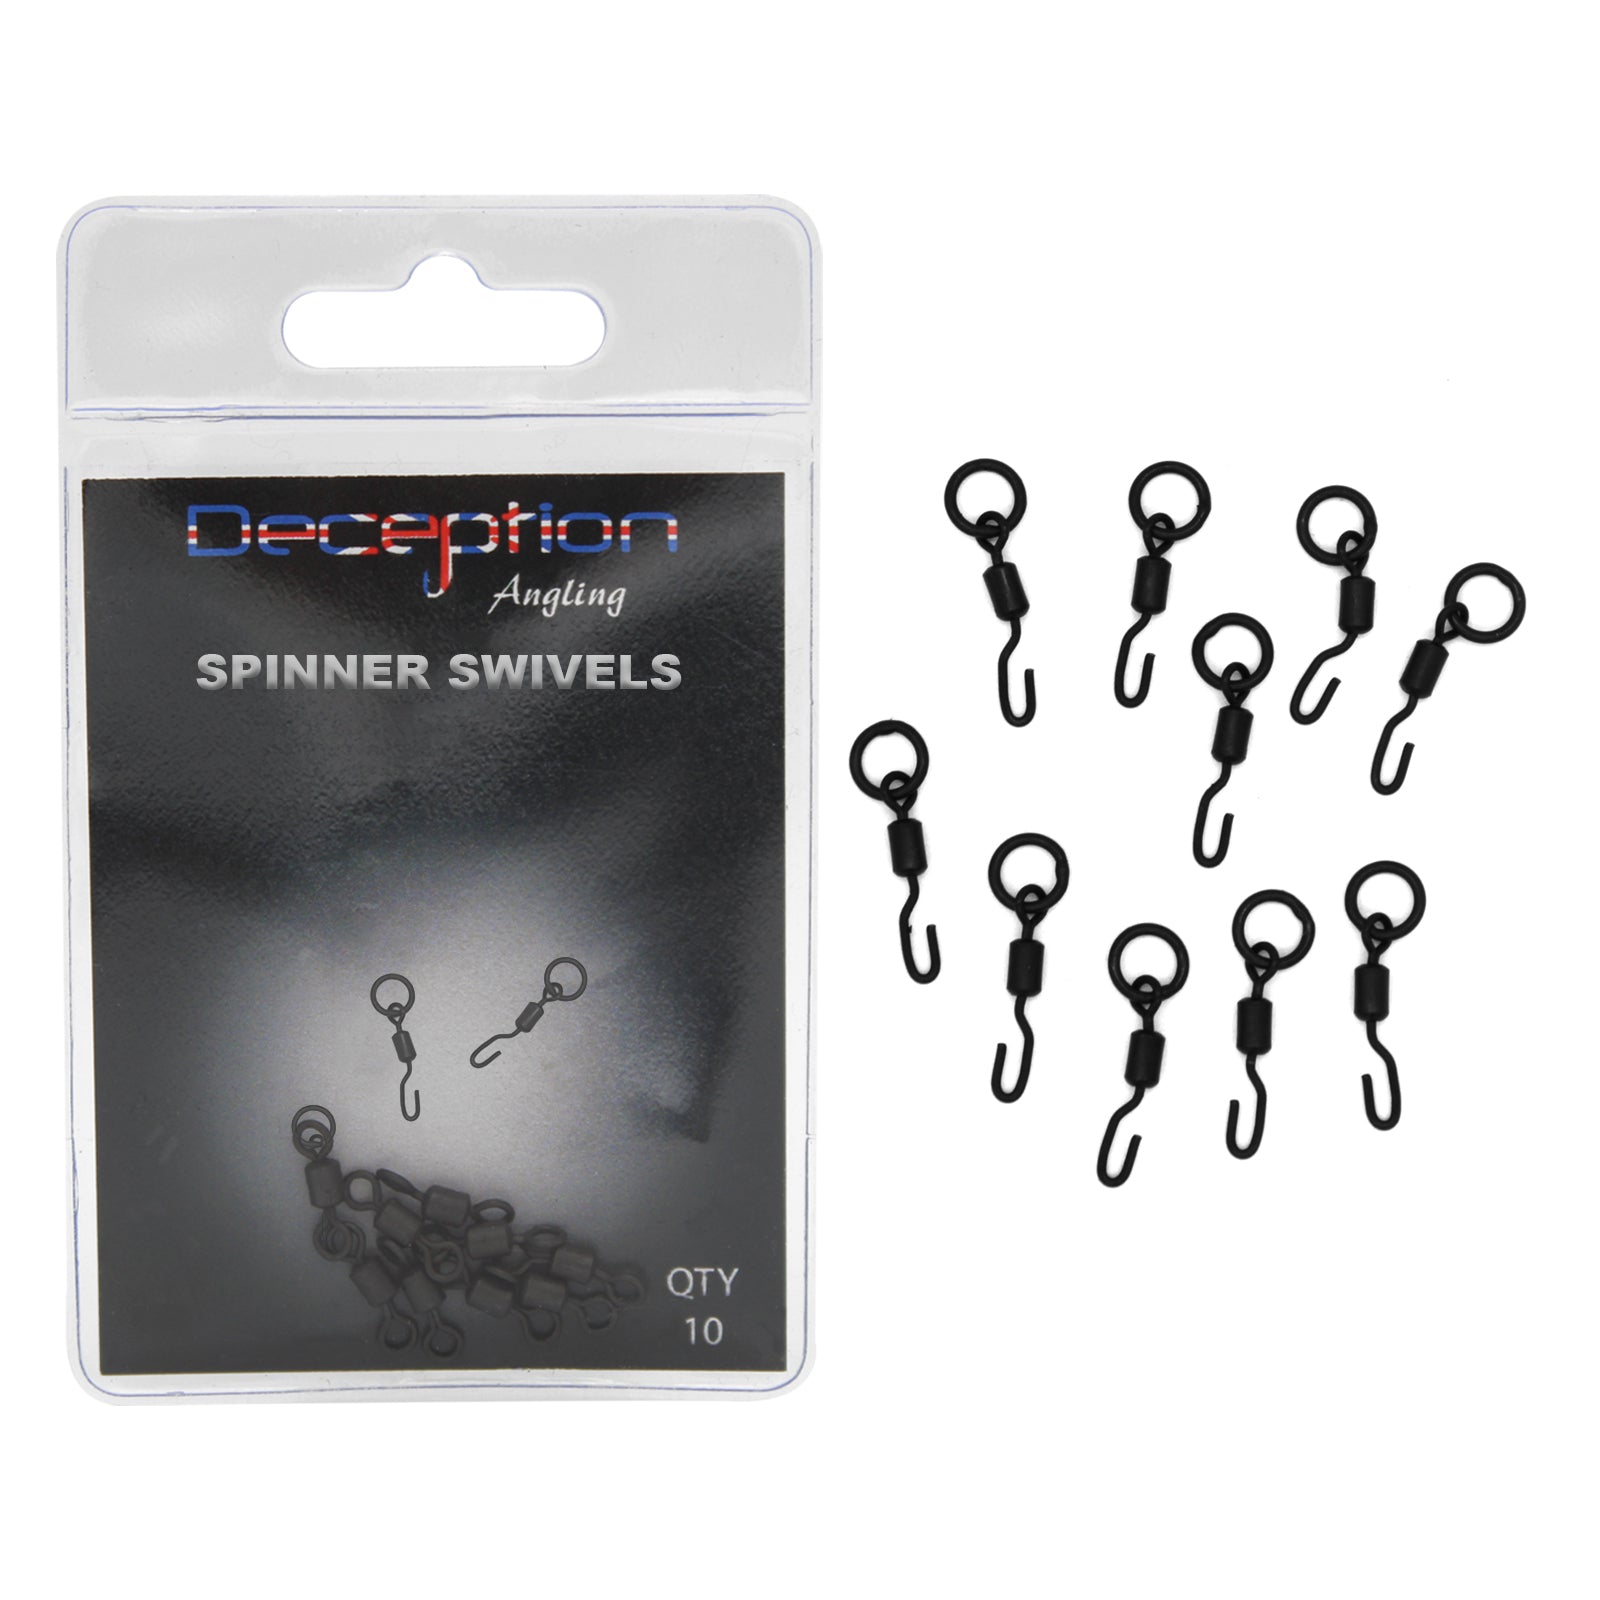 Deception Angling Spinner Swivels Pack of 10 for Fishing